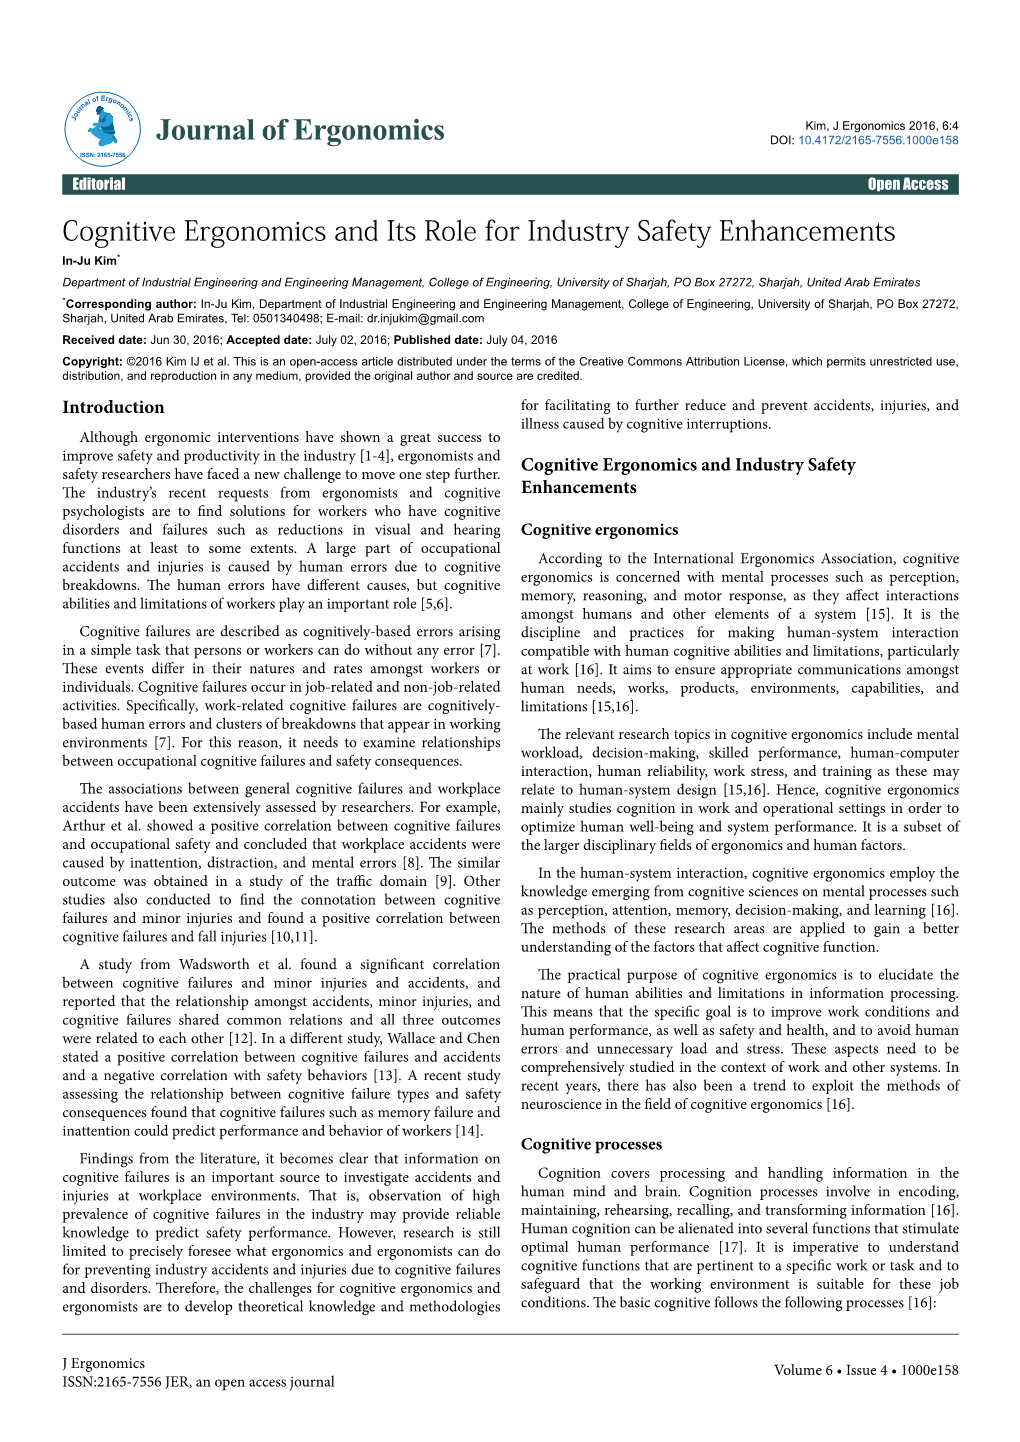 Cognitive Ergonomics and Its Role for Industry Safety Enhancements